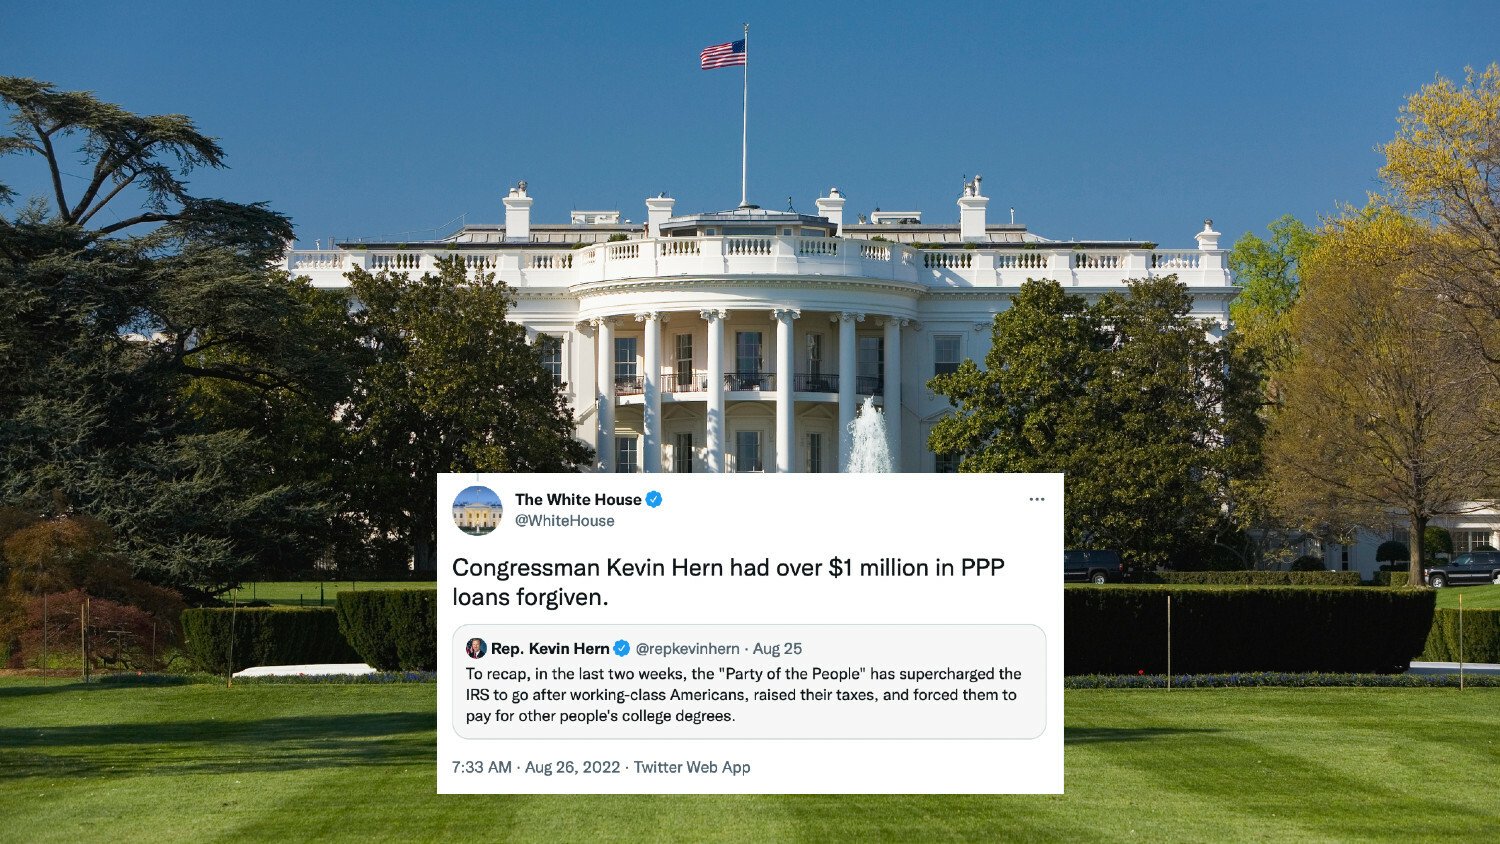 A photograph of the White House, overlaid with a tweet from the official White House account stating that 